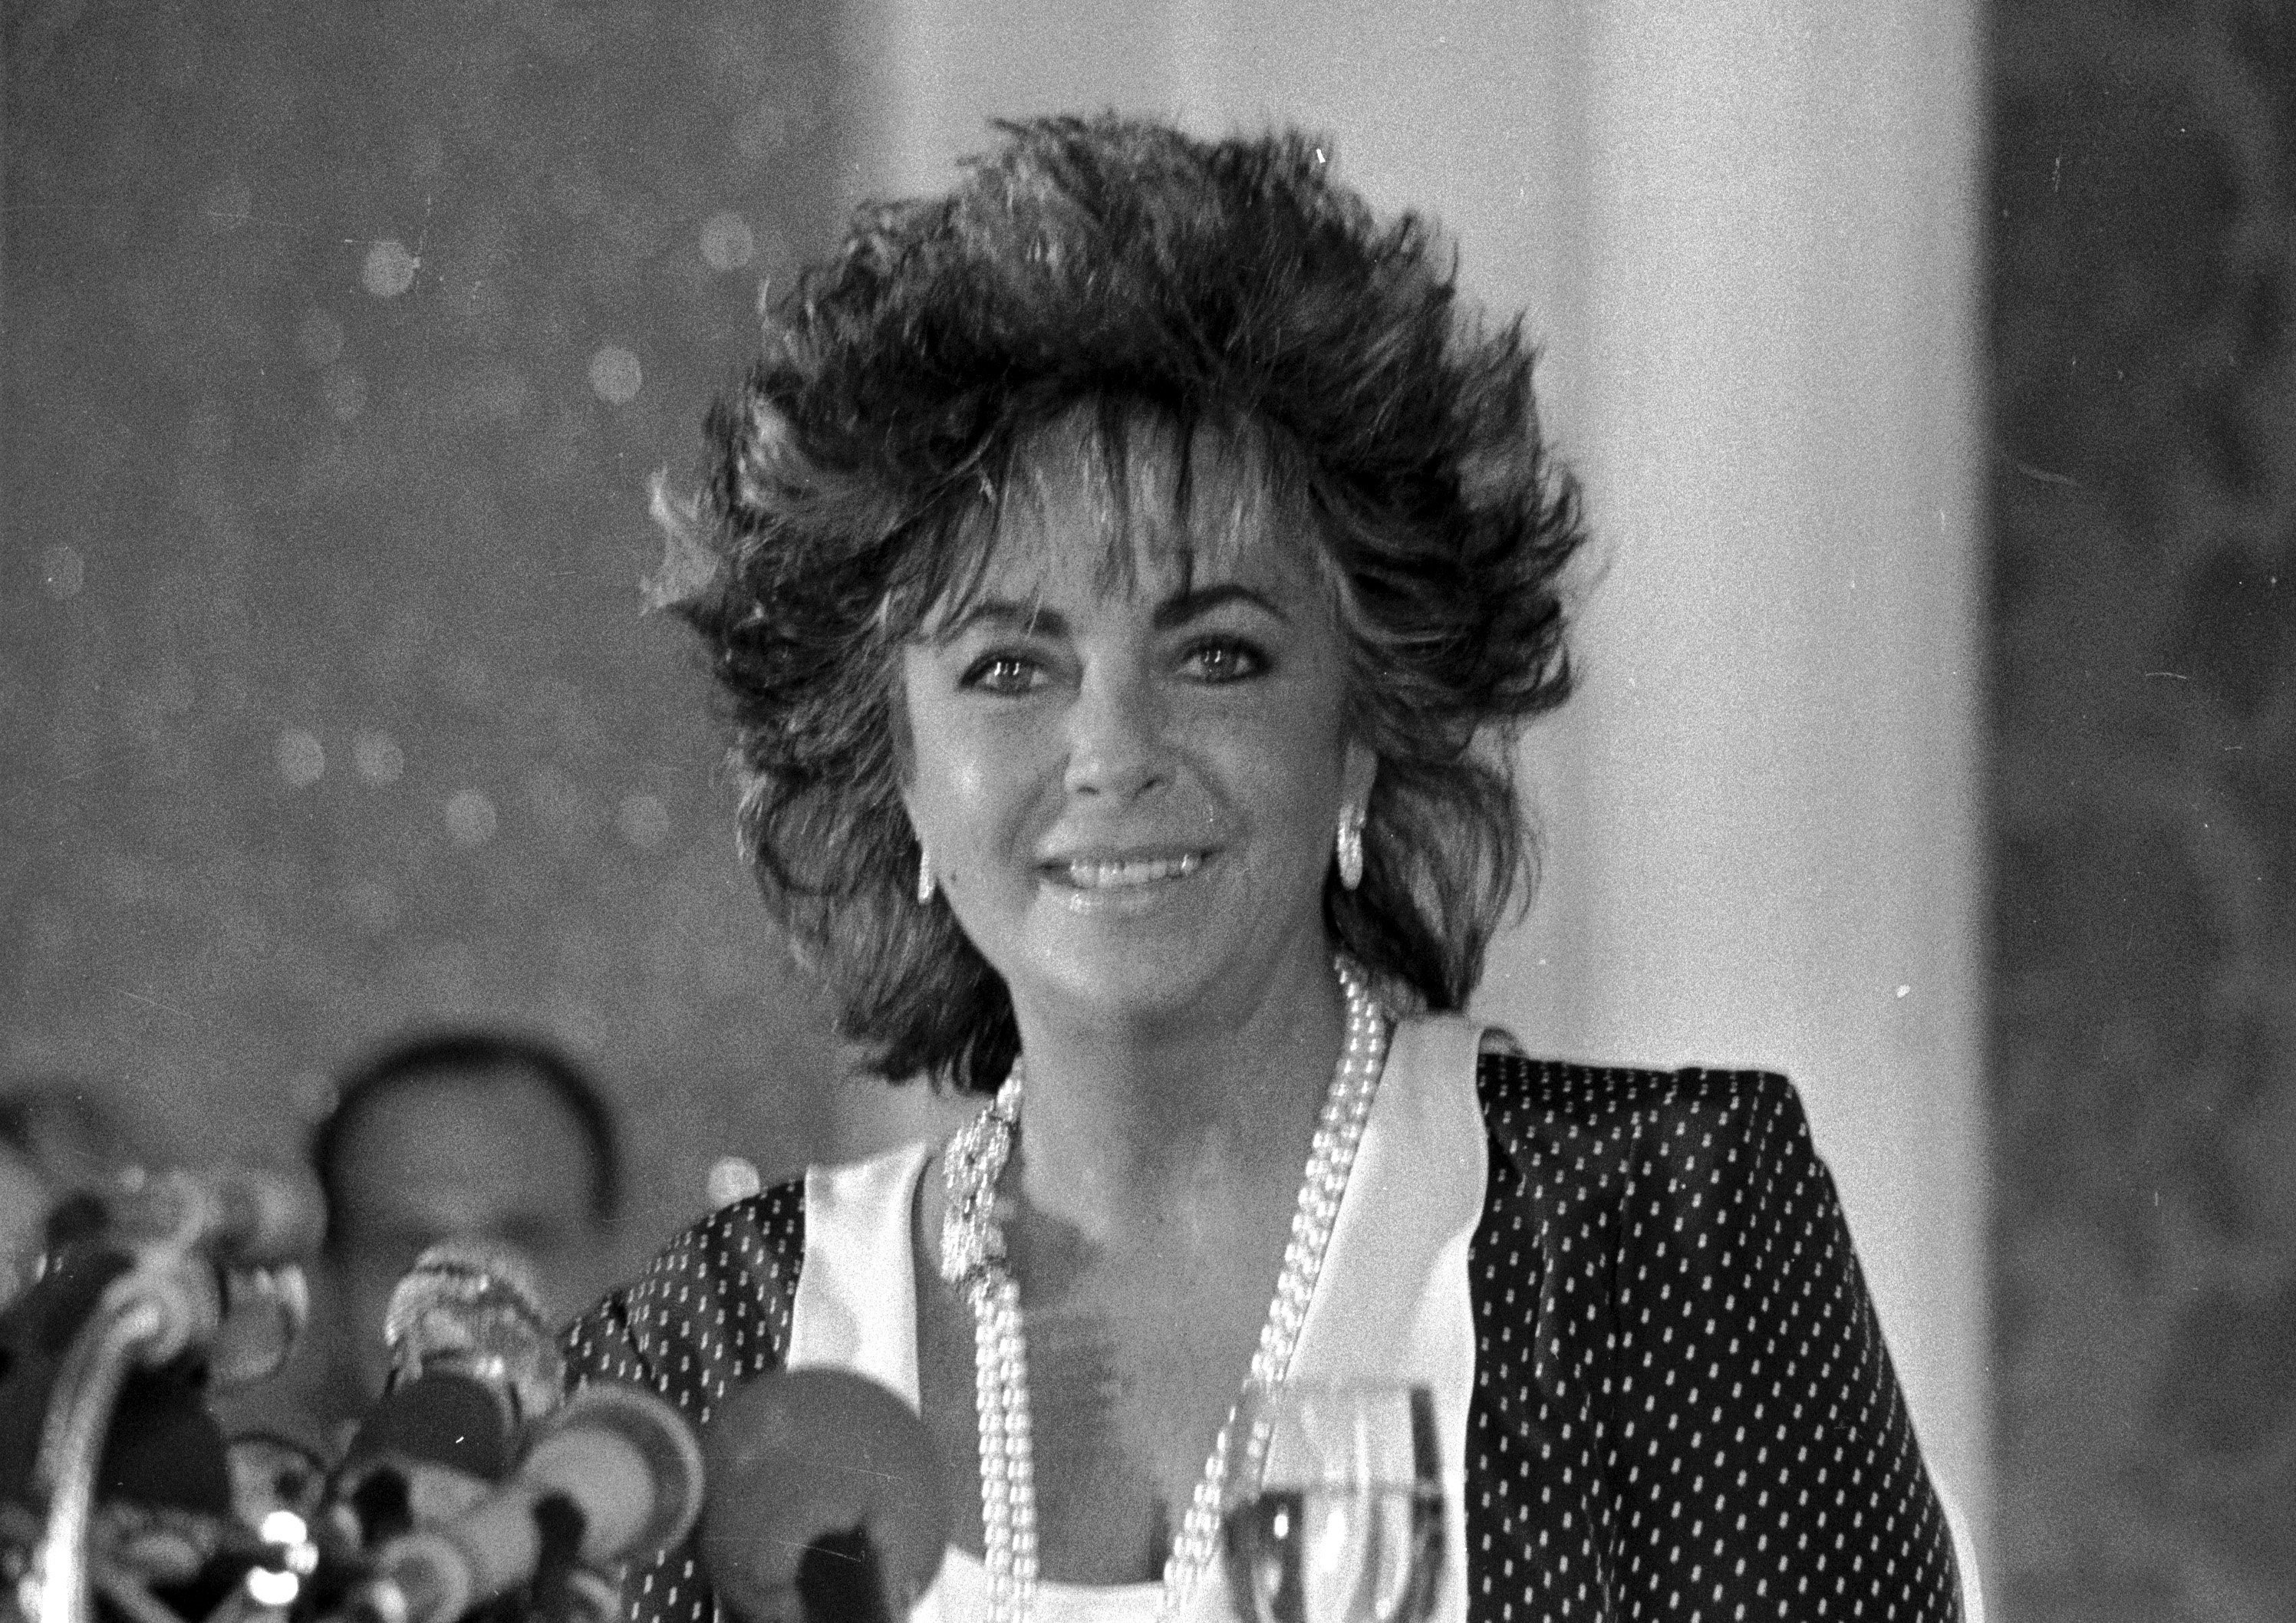 Elizabeth Taylor at the American Film Festival of Deauville in Normandy, France in 1985. | Source : Wikimedia Commons